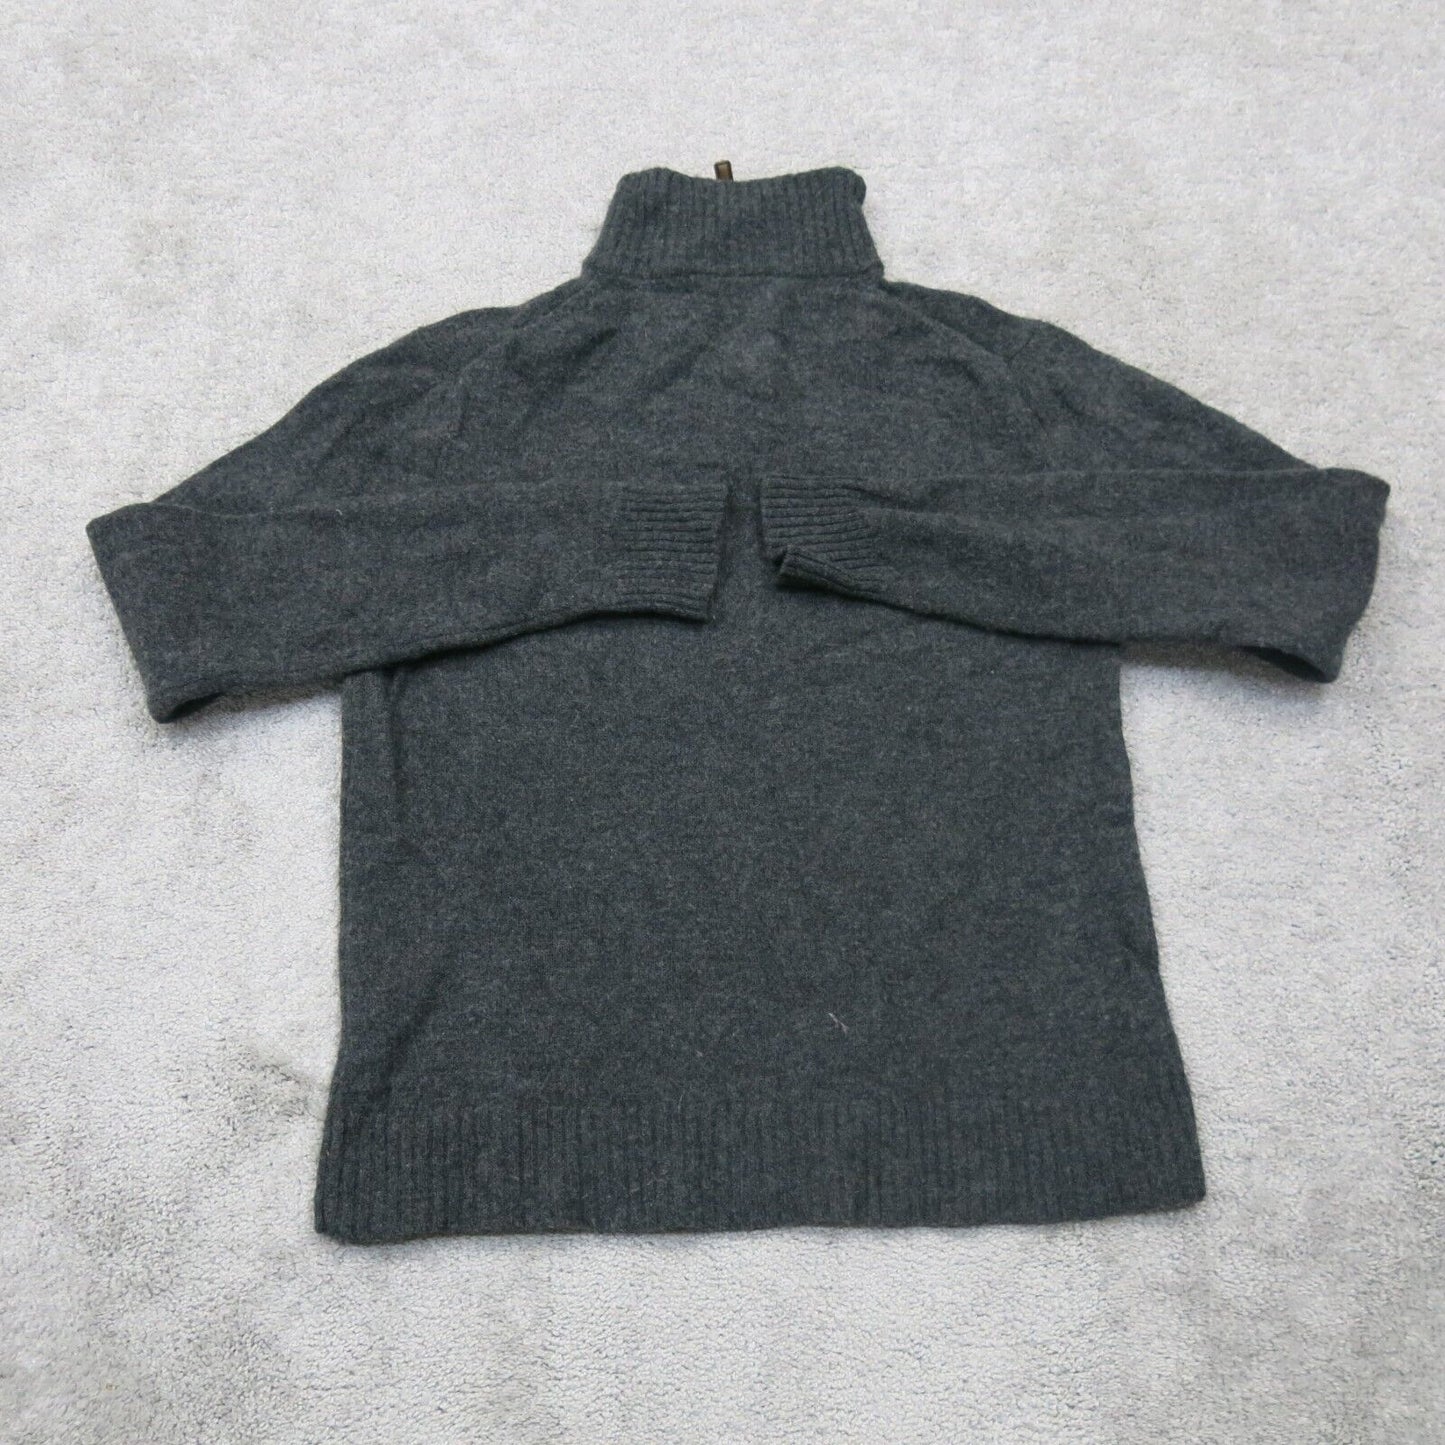 J Crew Mens Knitted Pullover Sweater 14 Zip Long Sleeves Black Size Medium